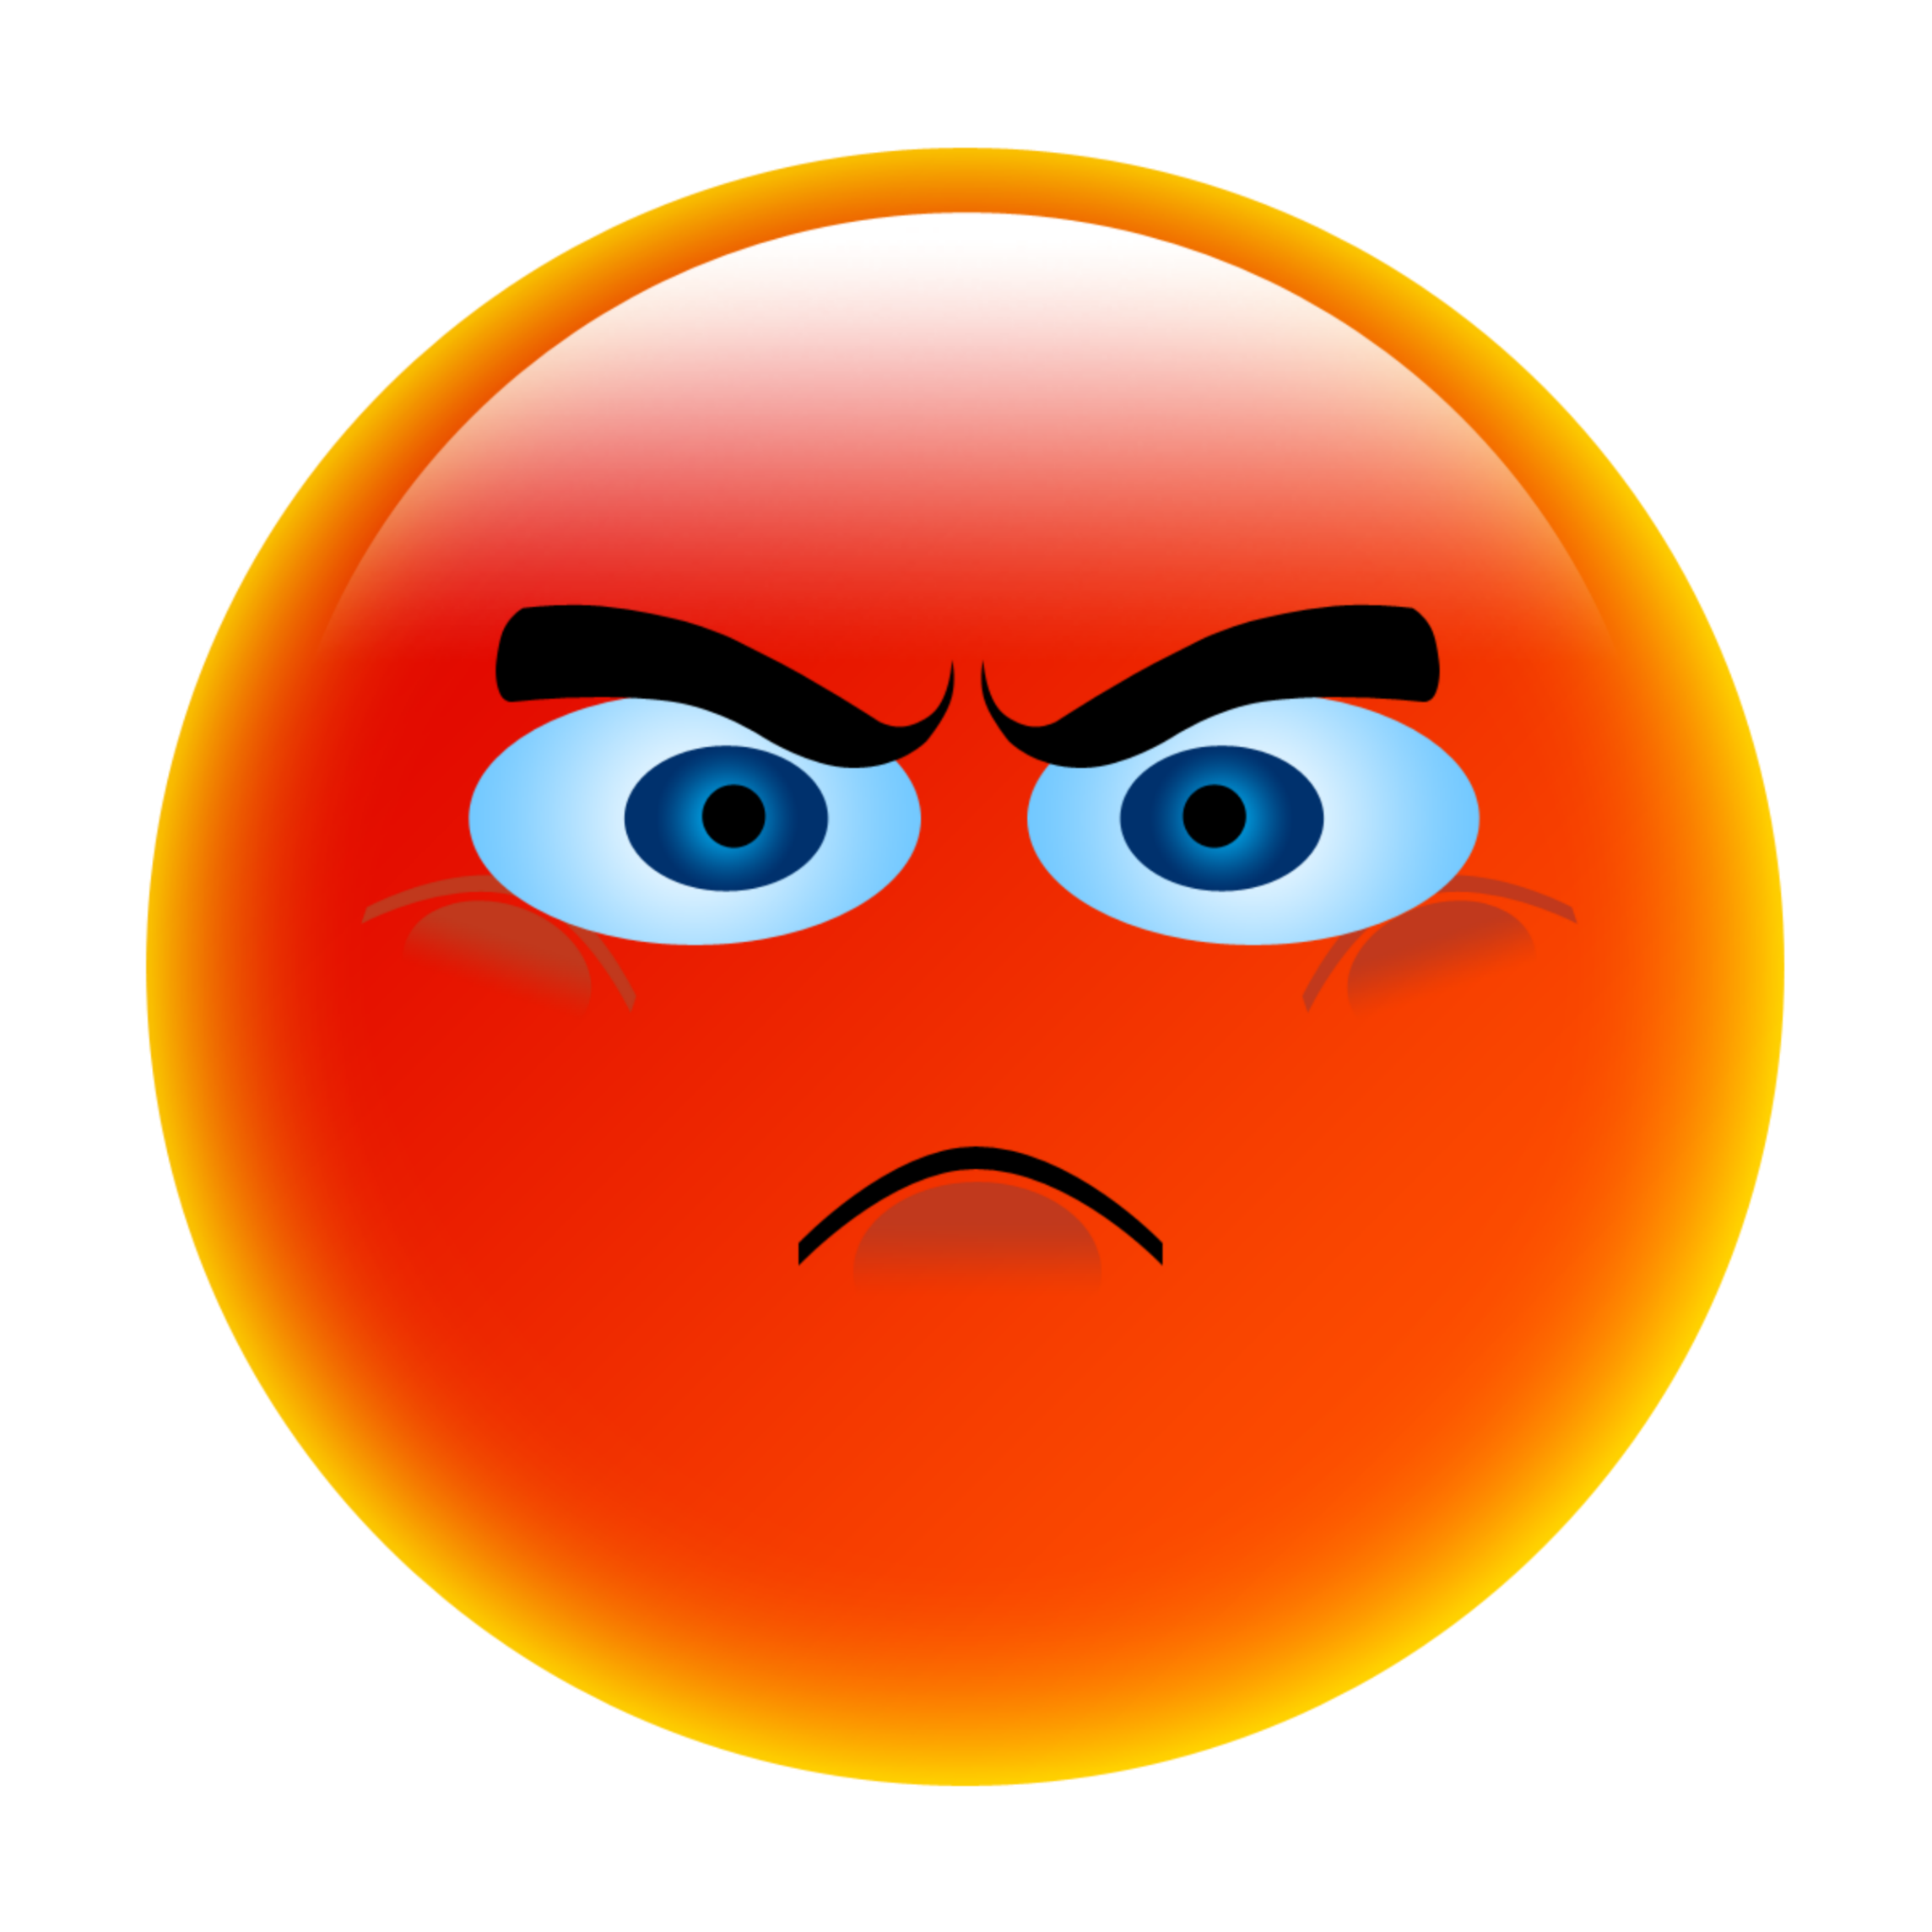 Anger Smiley Emoticon Face Clip Art Png X Px Anger Emoji CLOUD HOT GIRL